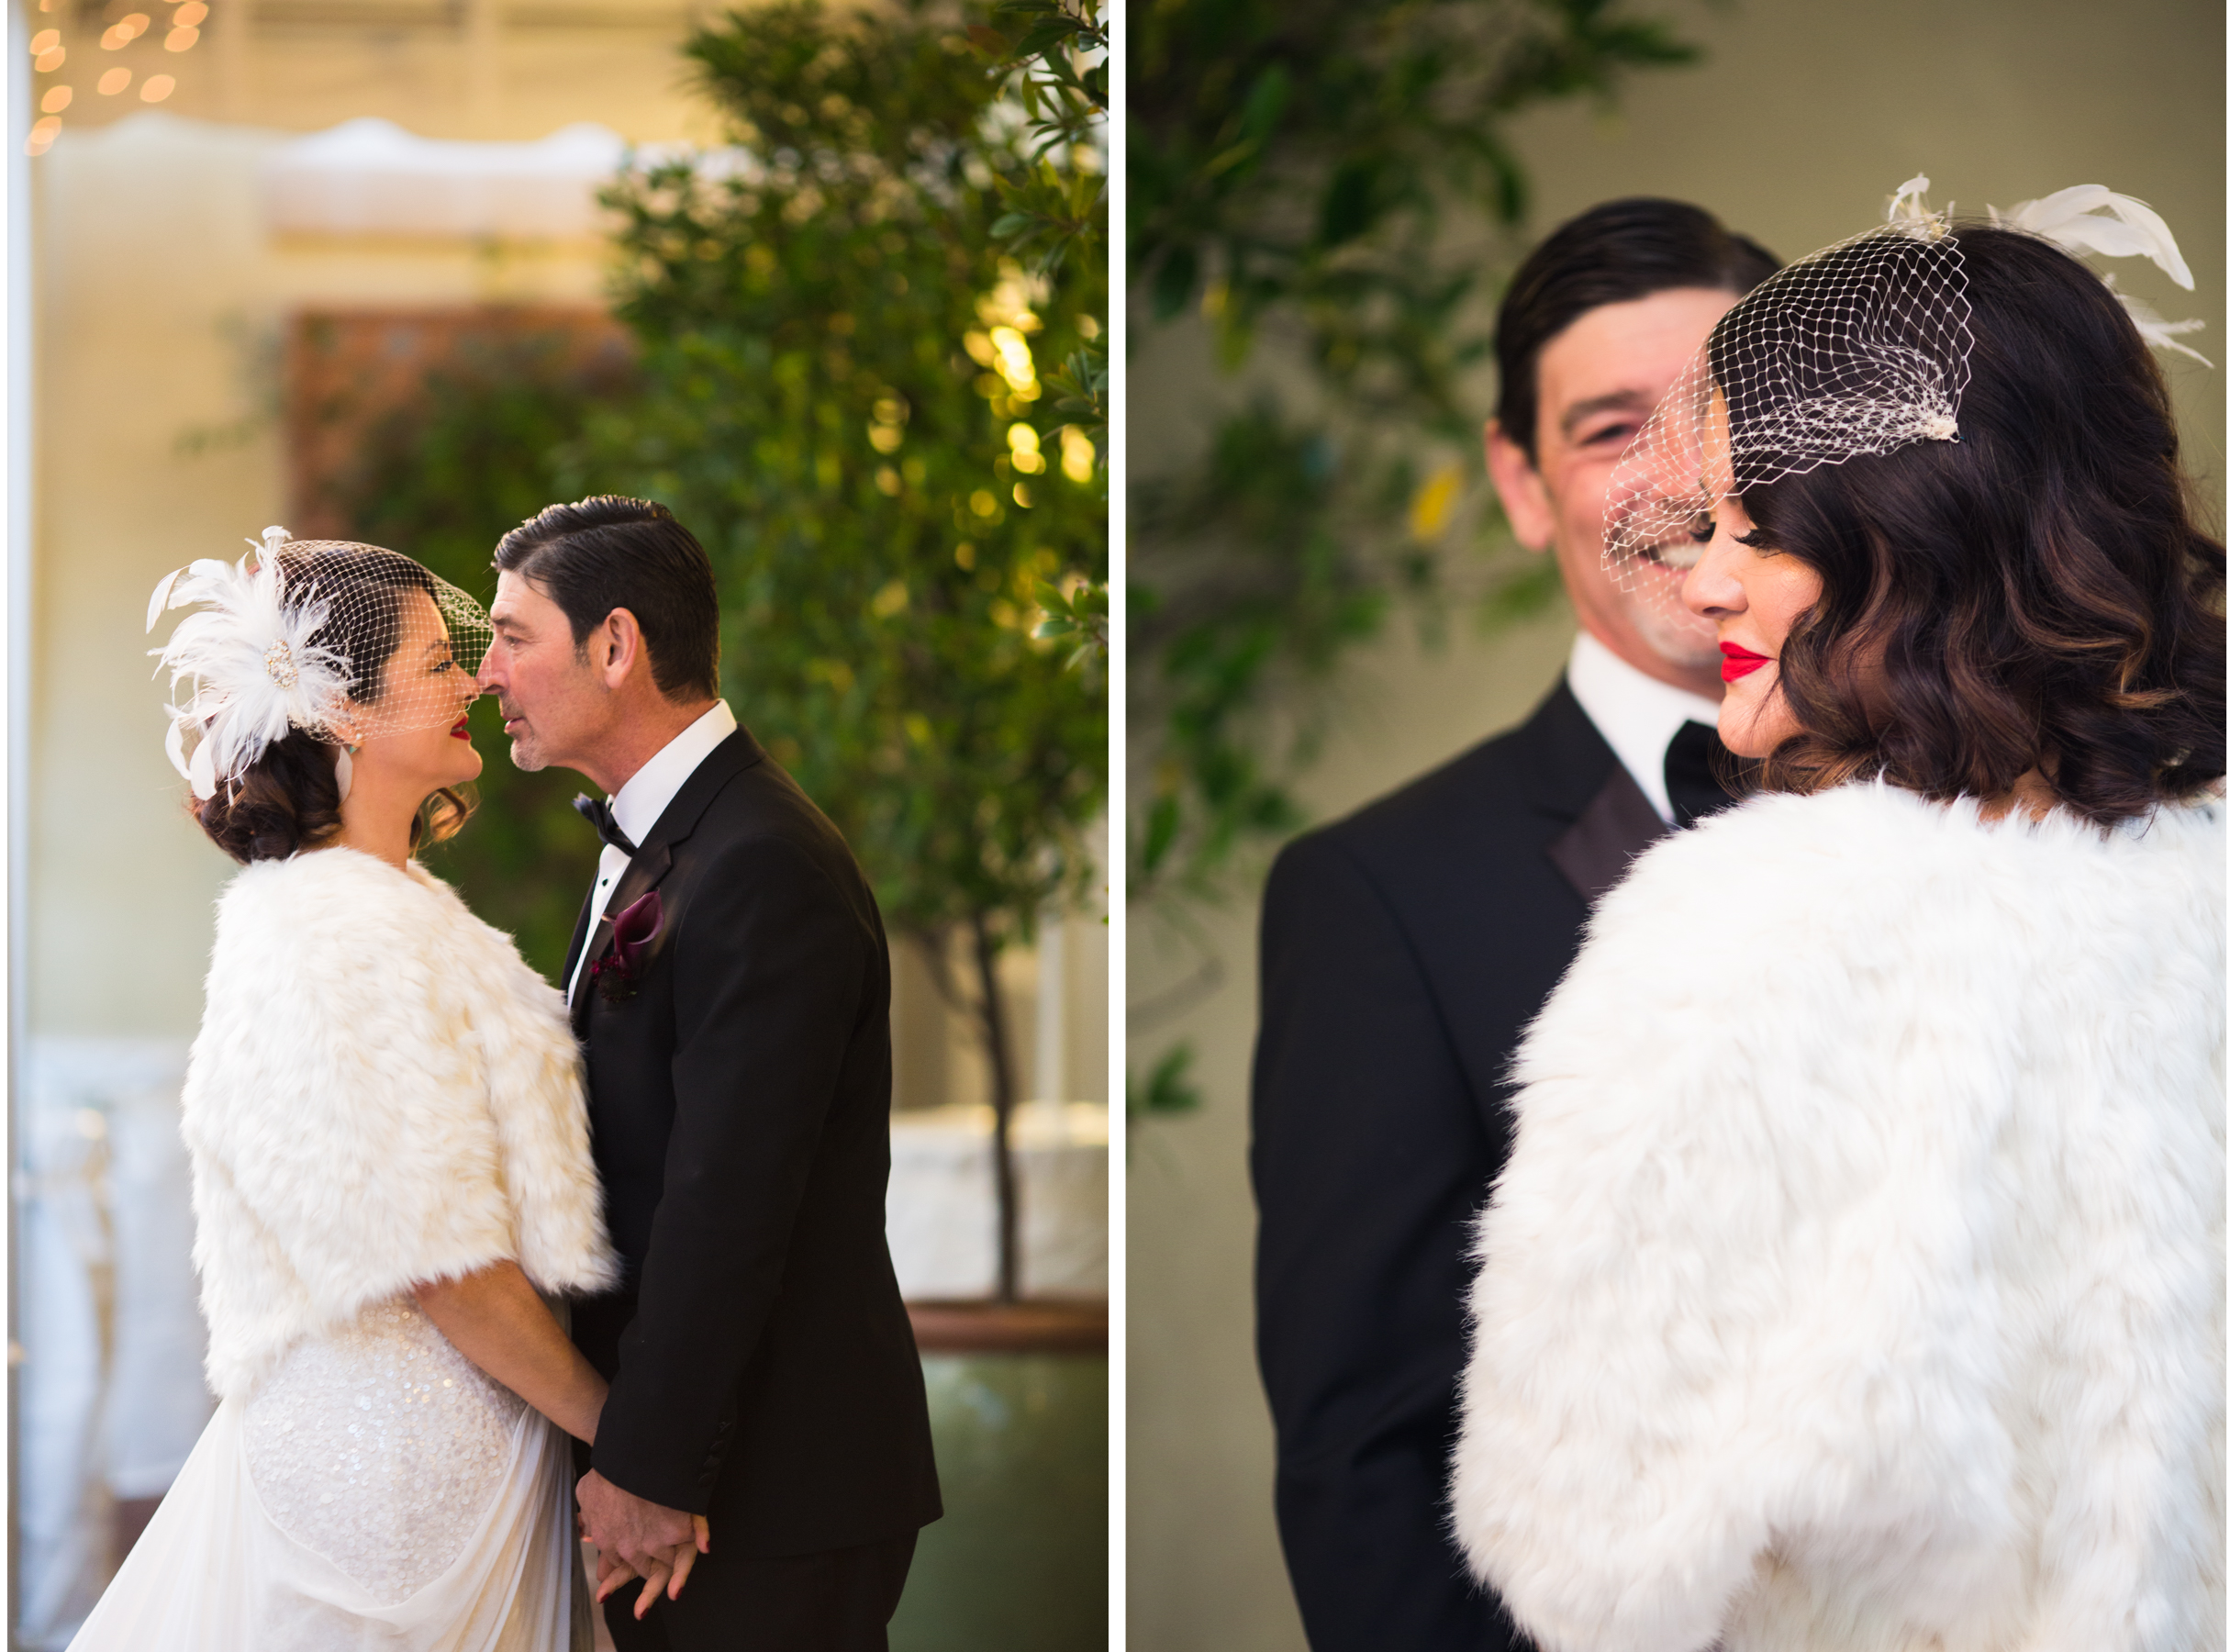 New Year's Eve Wedding Hotel Shattuck Plaza Bridal Portraits with string lights